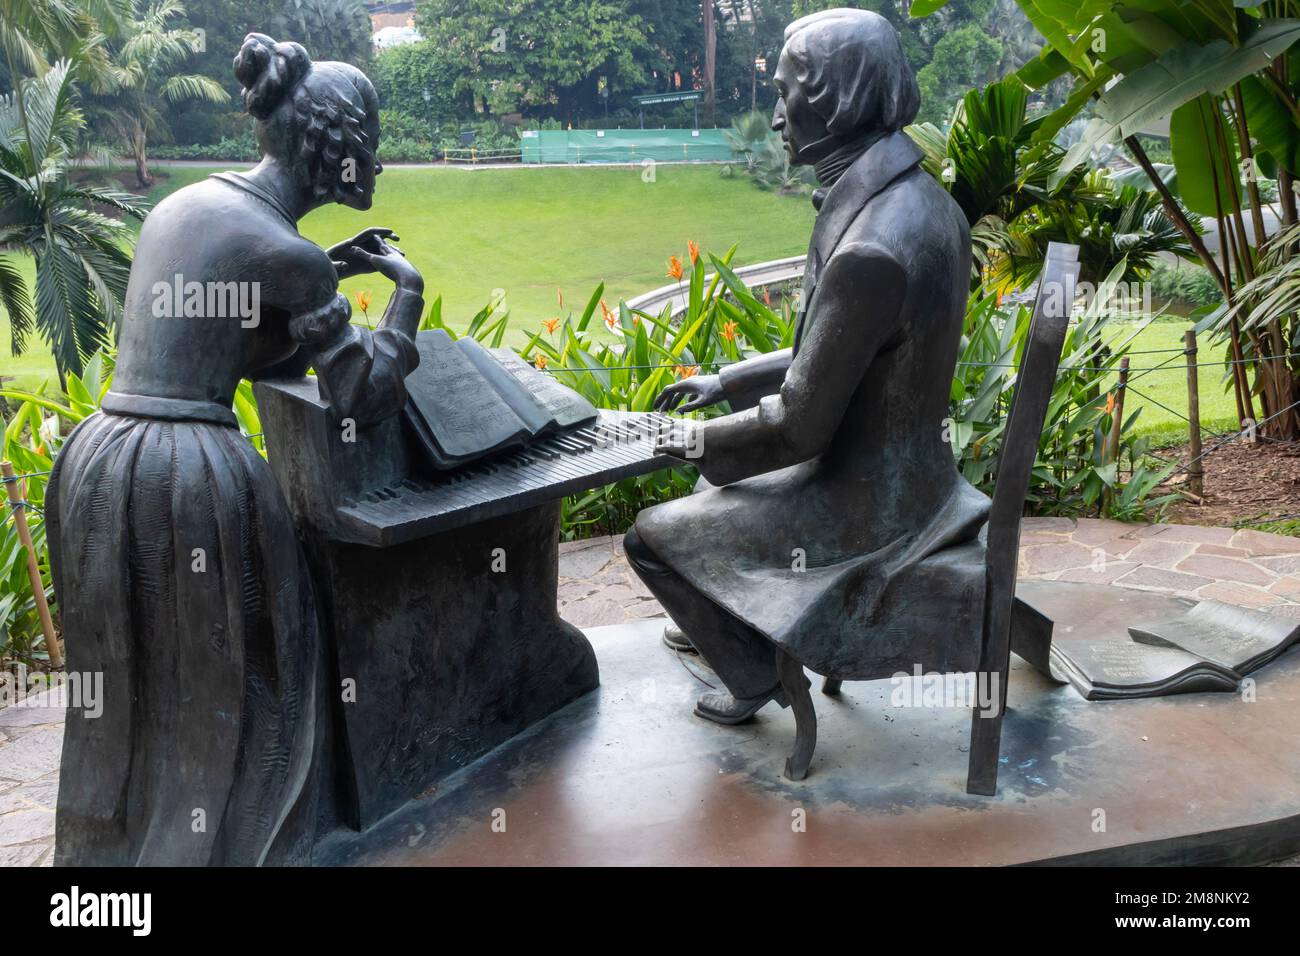 Frederick Chopin statue, Botanical Gardens, Singapore. This work of art was created by Polish sculptor Karol Badyna. Stock Photo